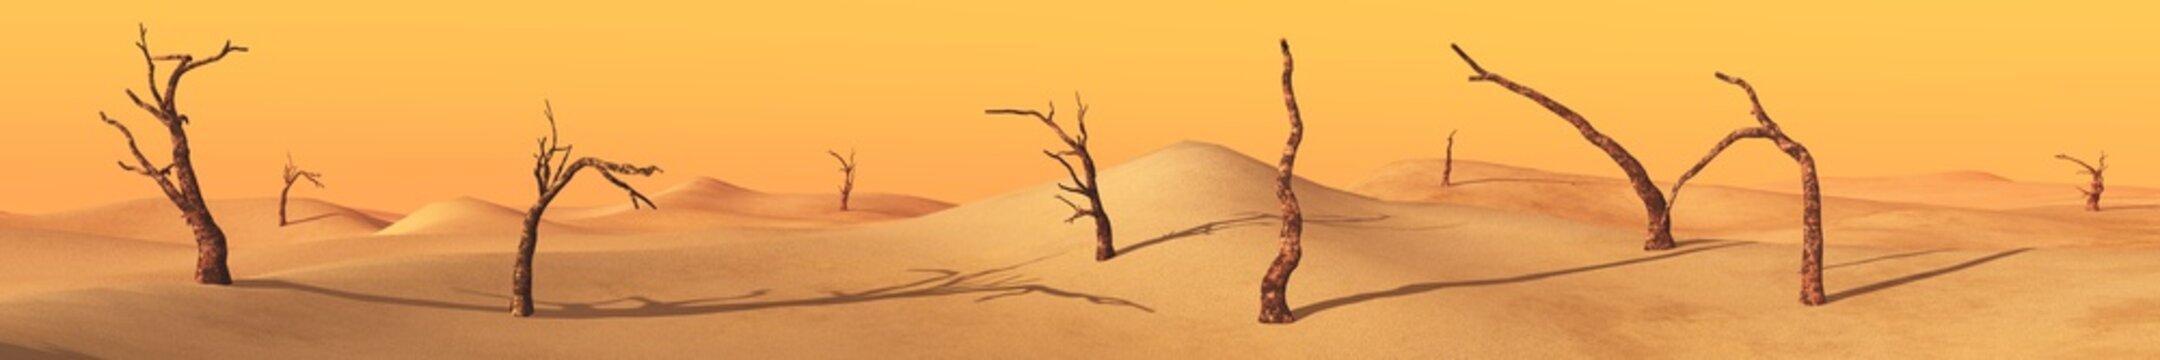 Panorama of the desert. Dead trees in the sand.